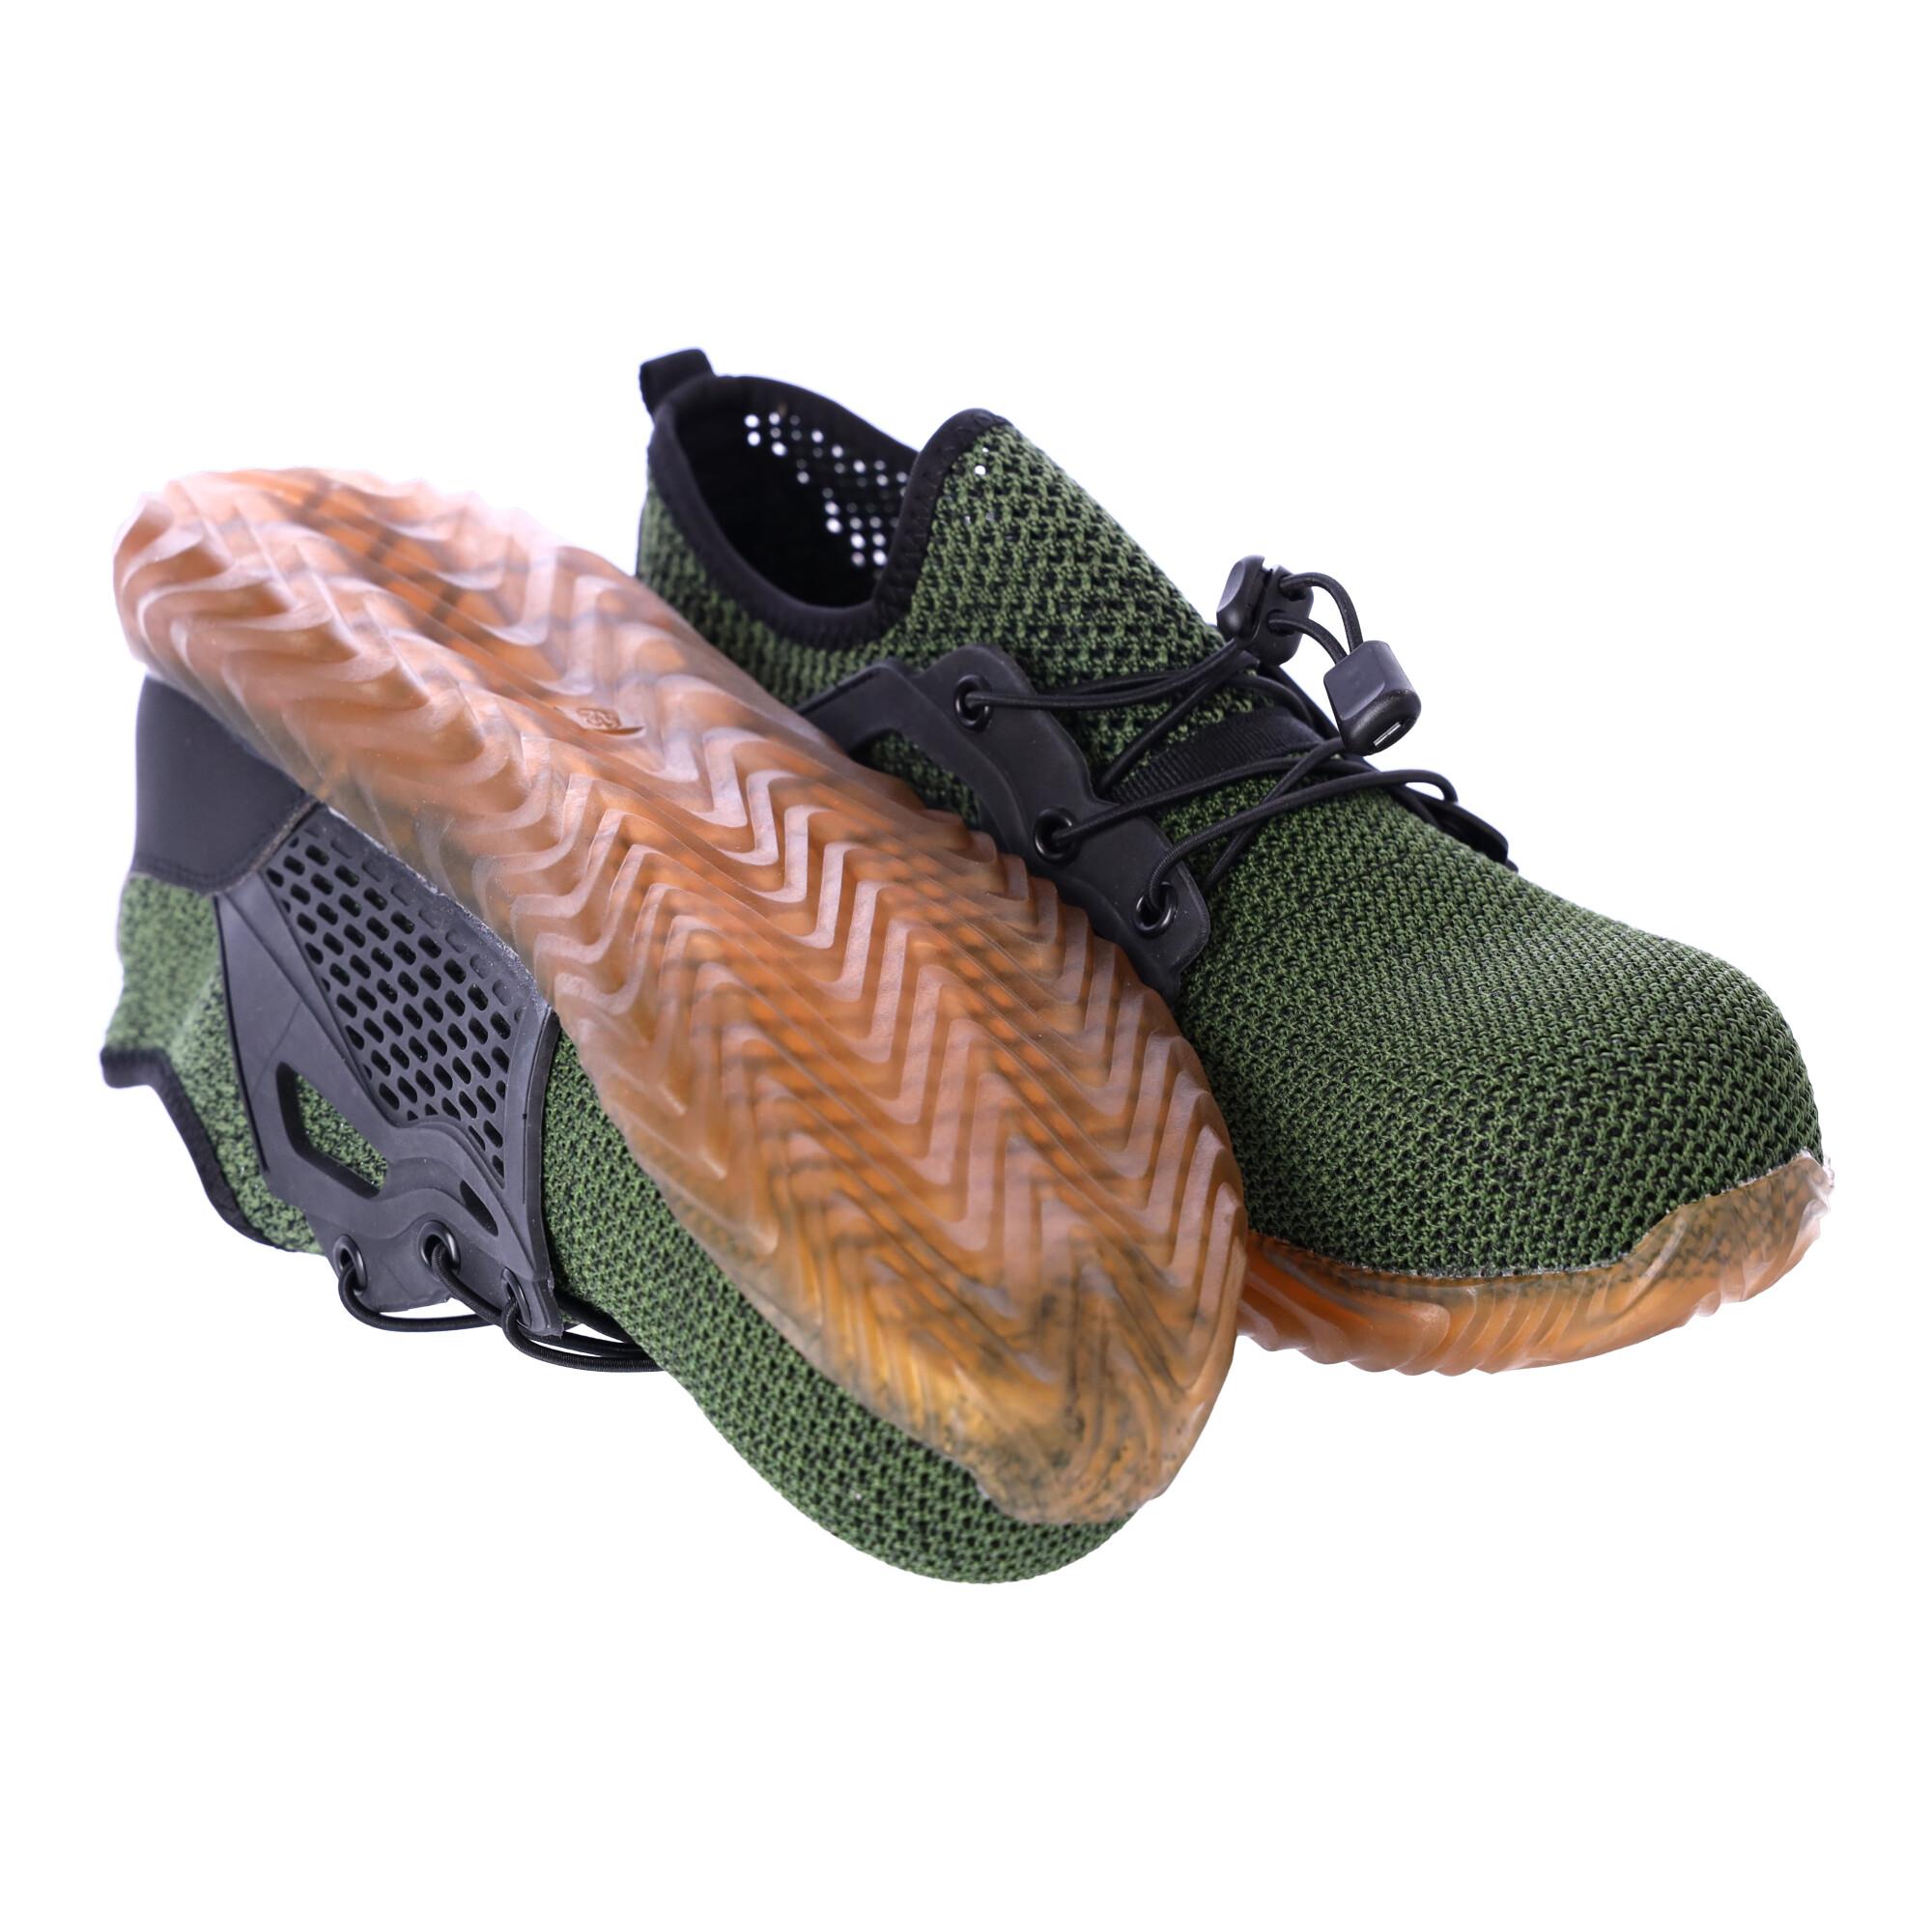 Work safety shoes Soft "43" - green